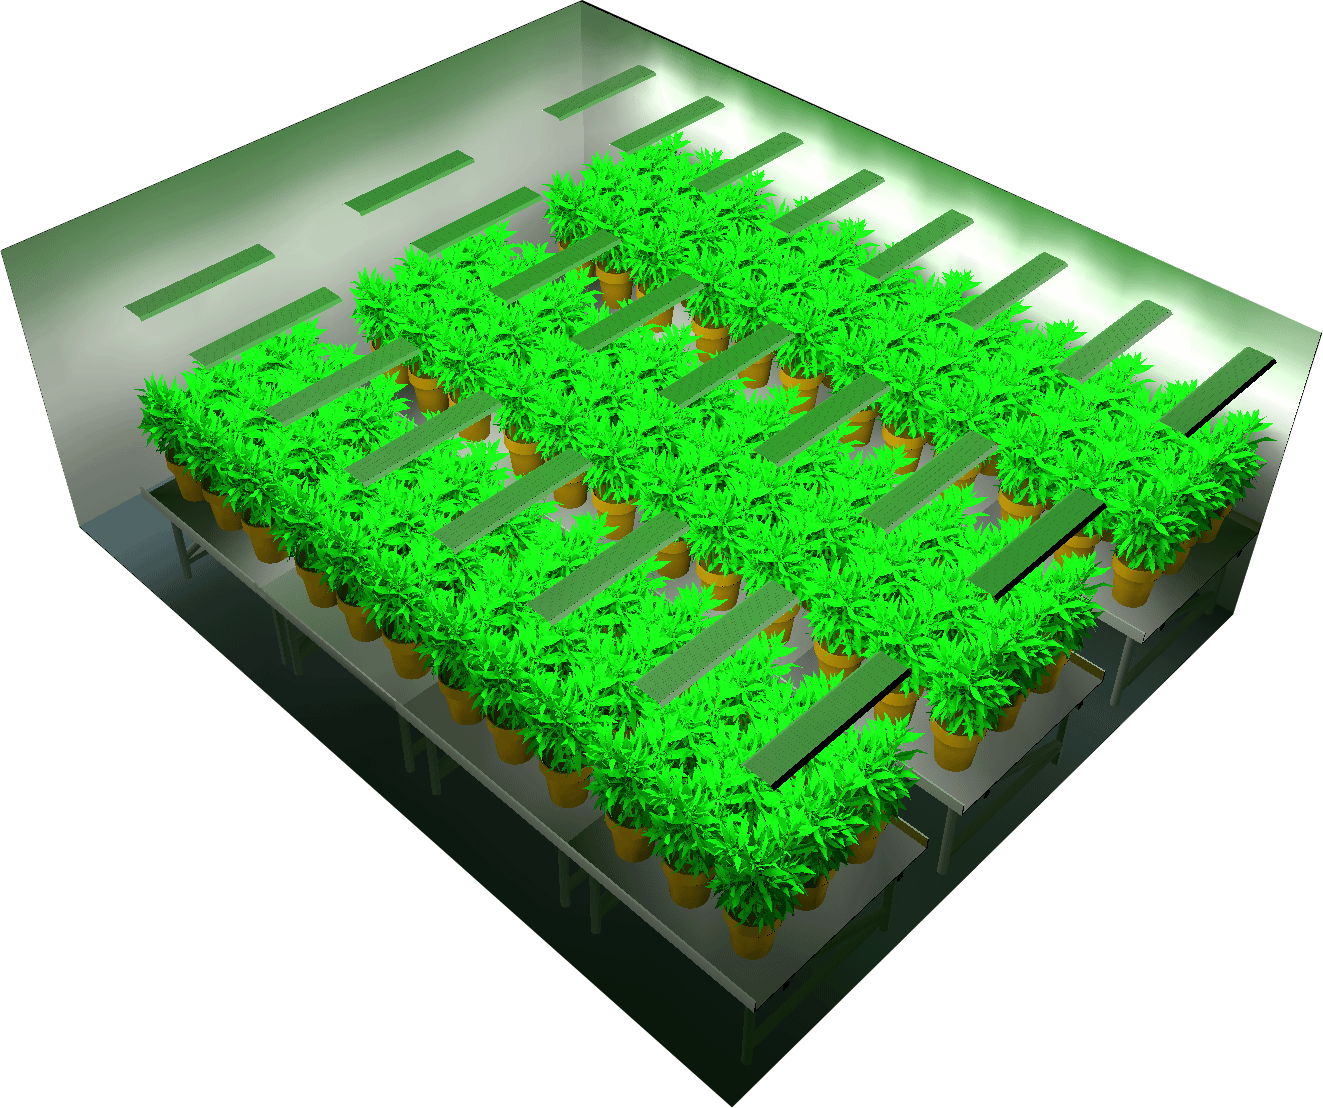 Project planning – CSC - Light simulation for social clubs and projects hortiONe600 .Relux Simuilation 3d Room top 2